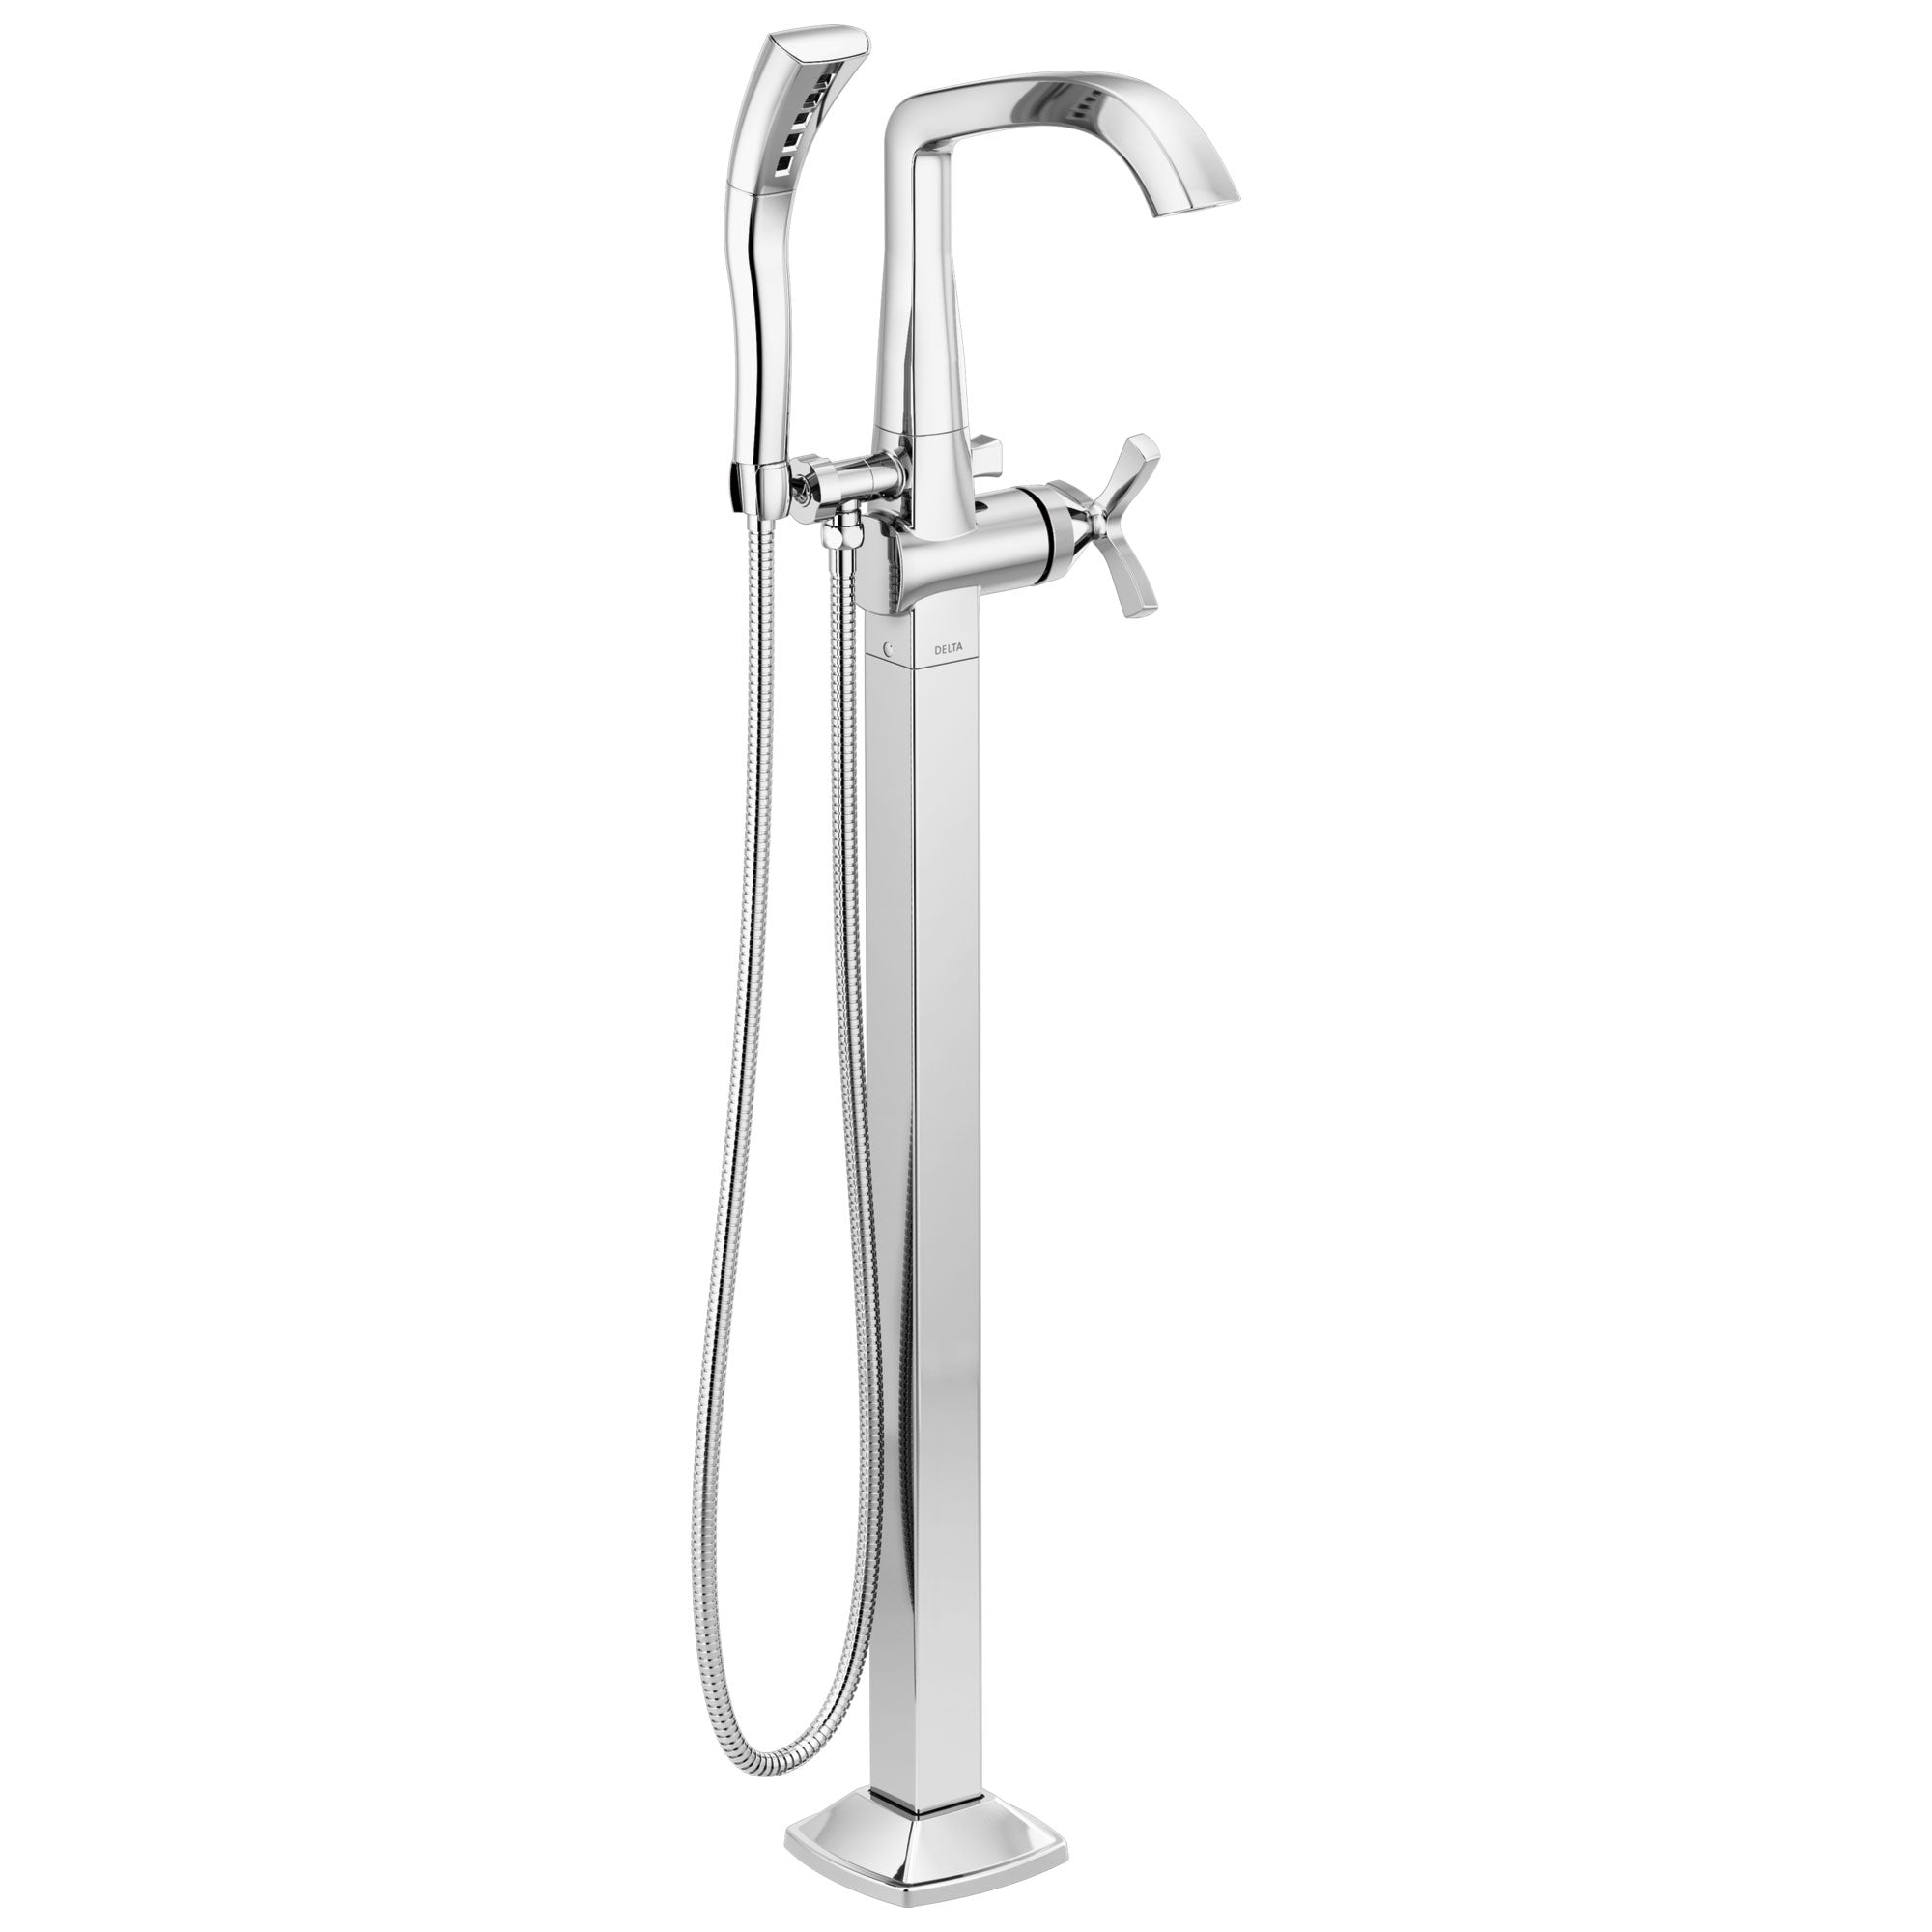 Delta Stryke Chrome Finish Single Helo Cross Handle Floor Mount Tub Filler Faucet with Hand Sprayer Includes Rough-in Valve D3044V